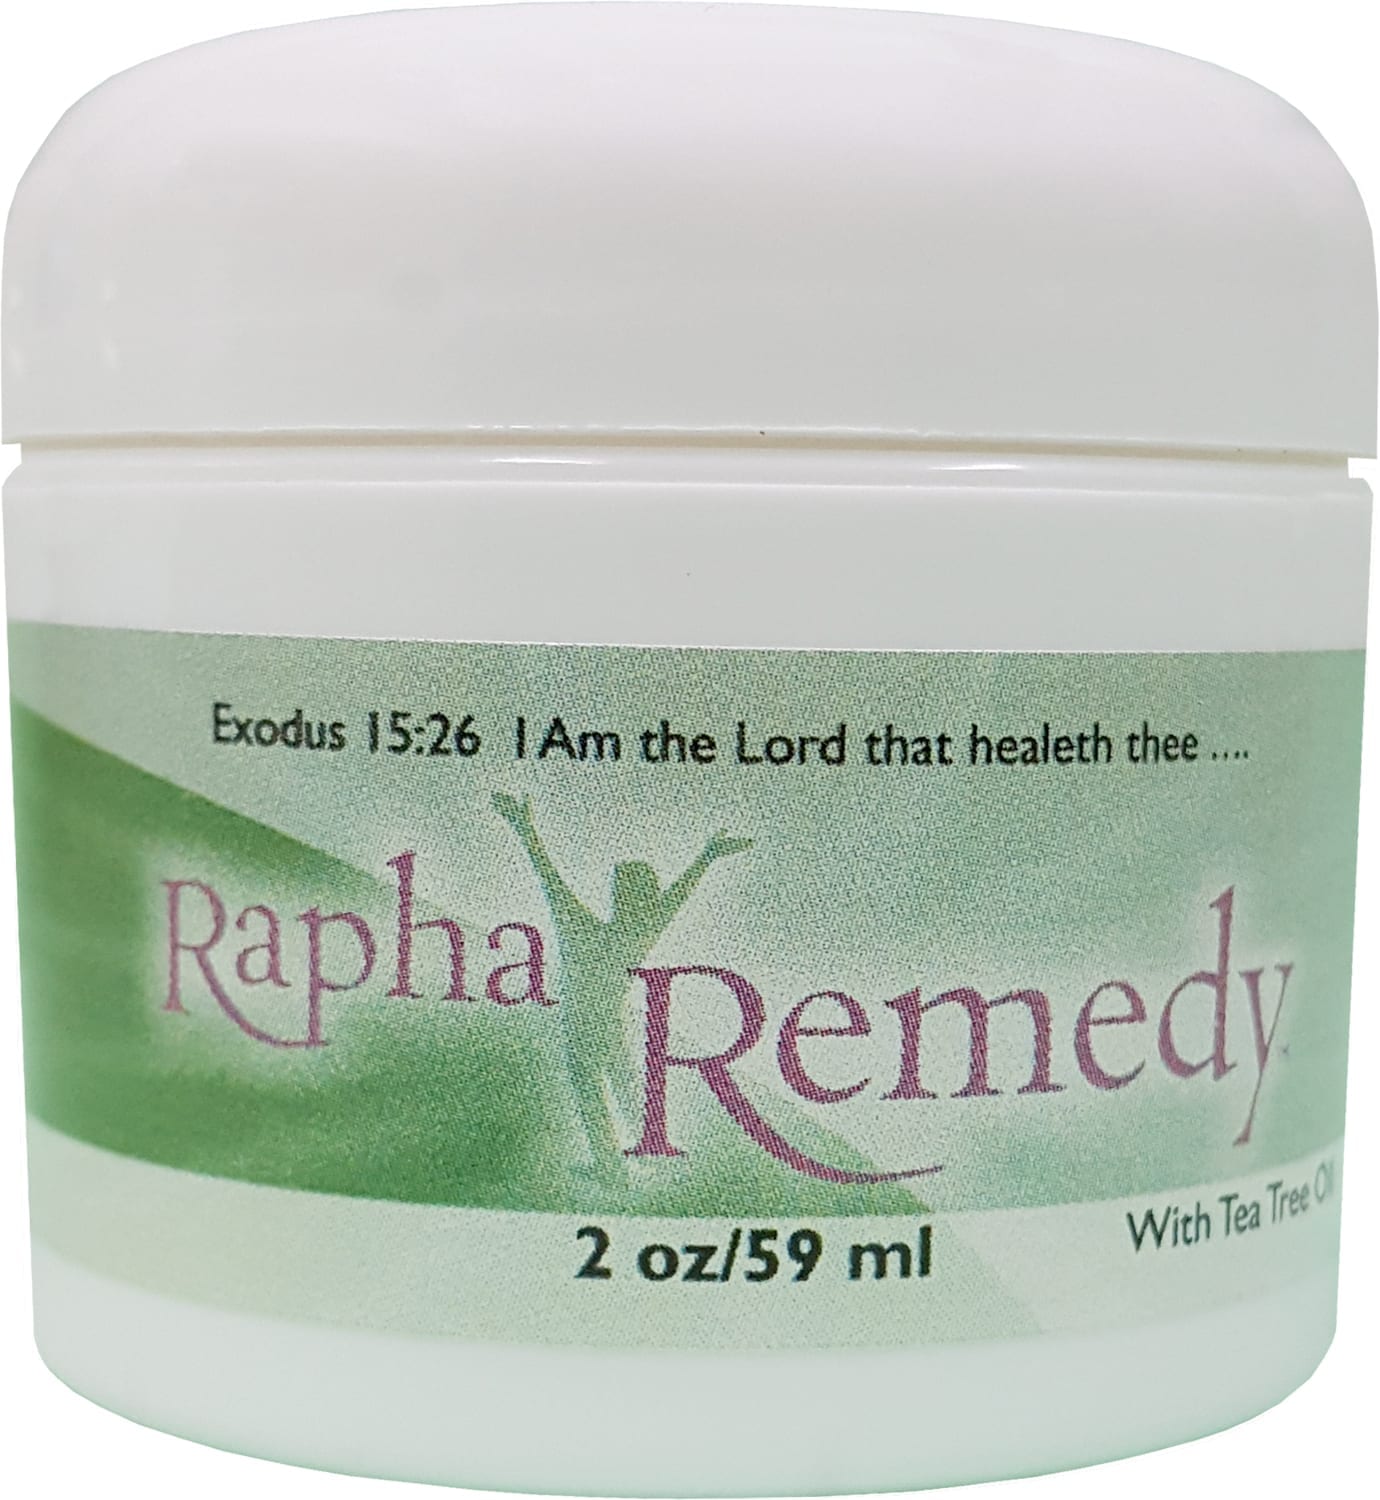 A jar of Rapha Remedy with Tea Tree Oil on a white background.